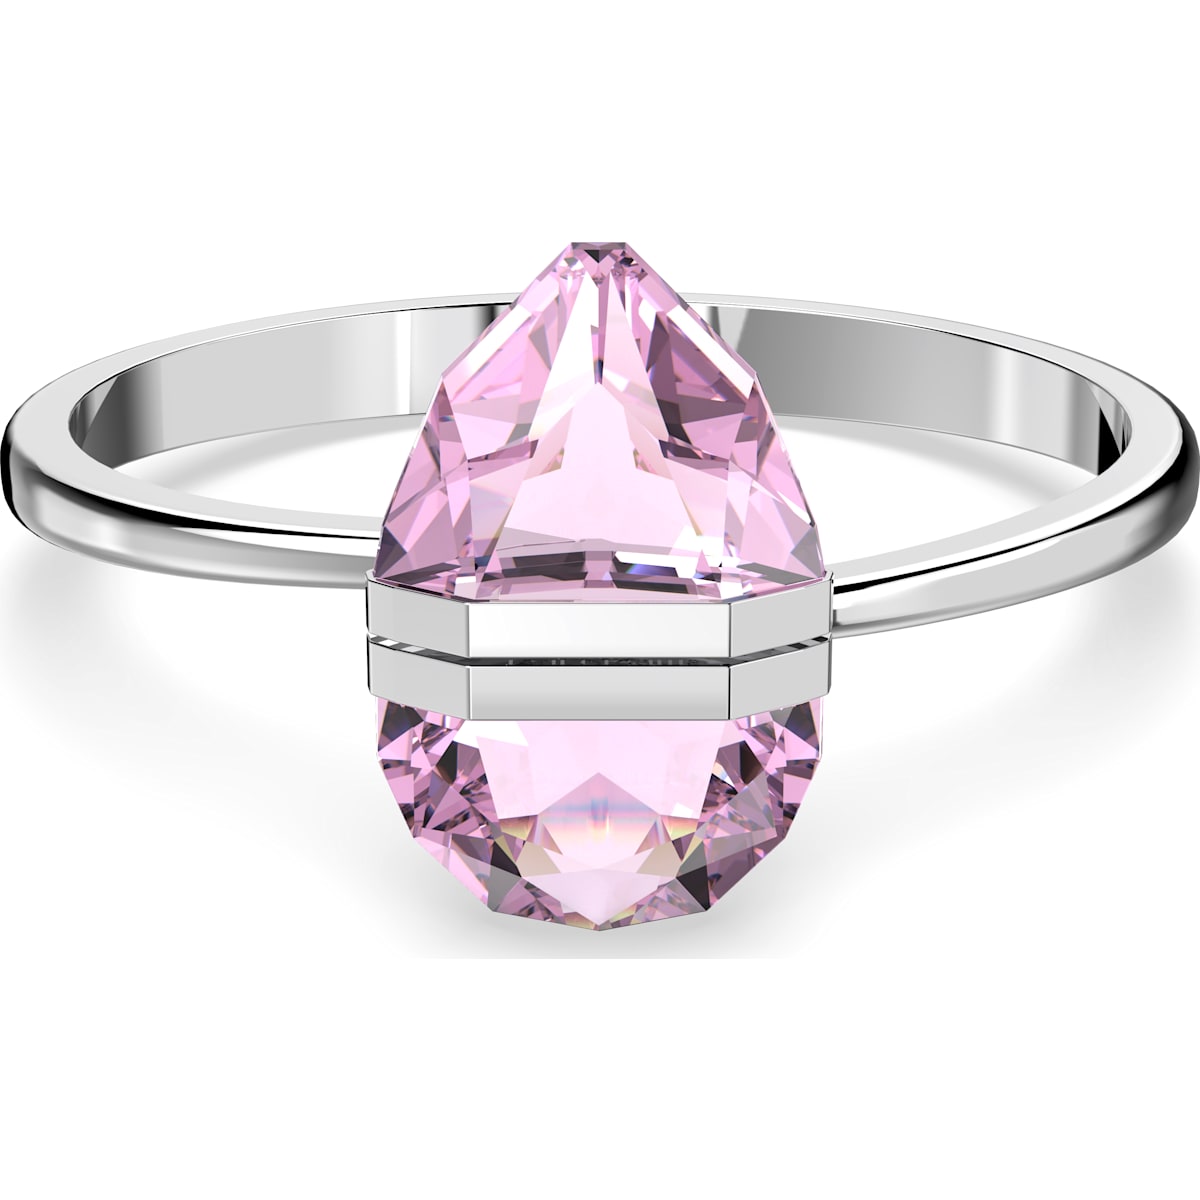 Swarovski Lucent Stainless Steel Pink Oversized Crystal Magnetic Bangle